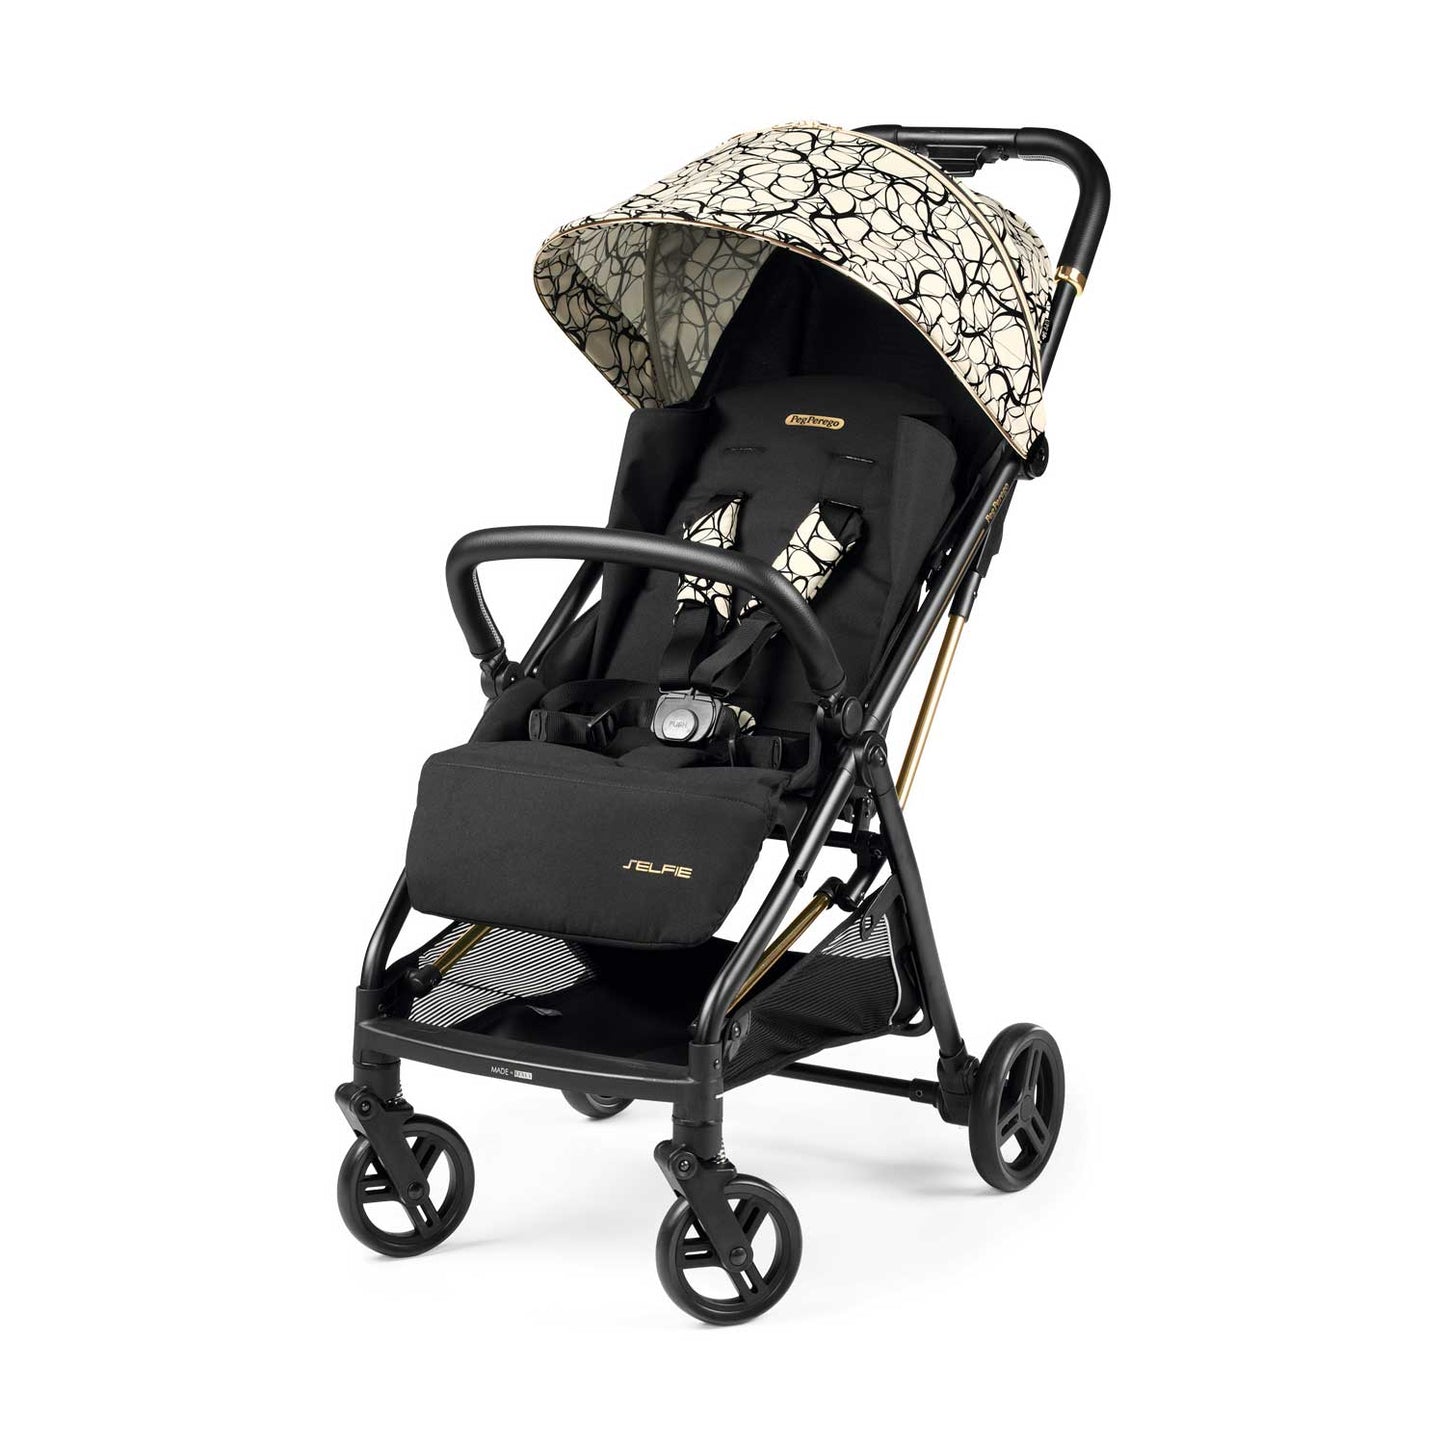 Peg Perego - Selfie compact stroller - MADE IN ITALY